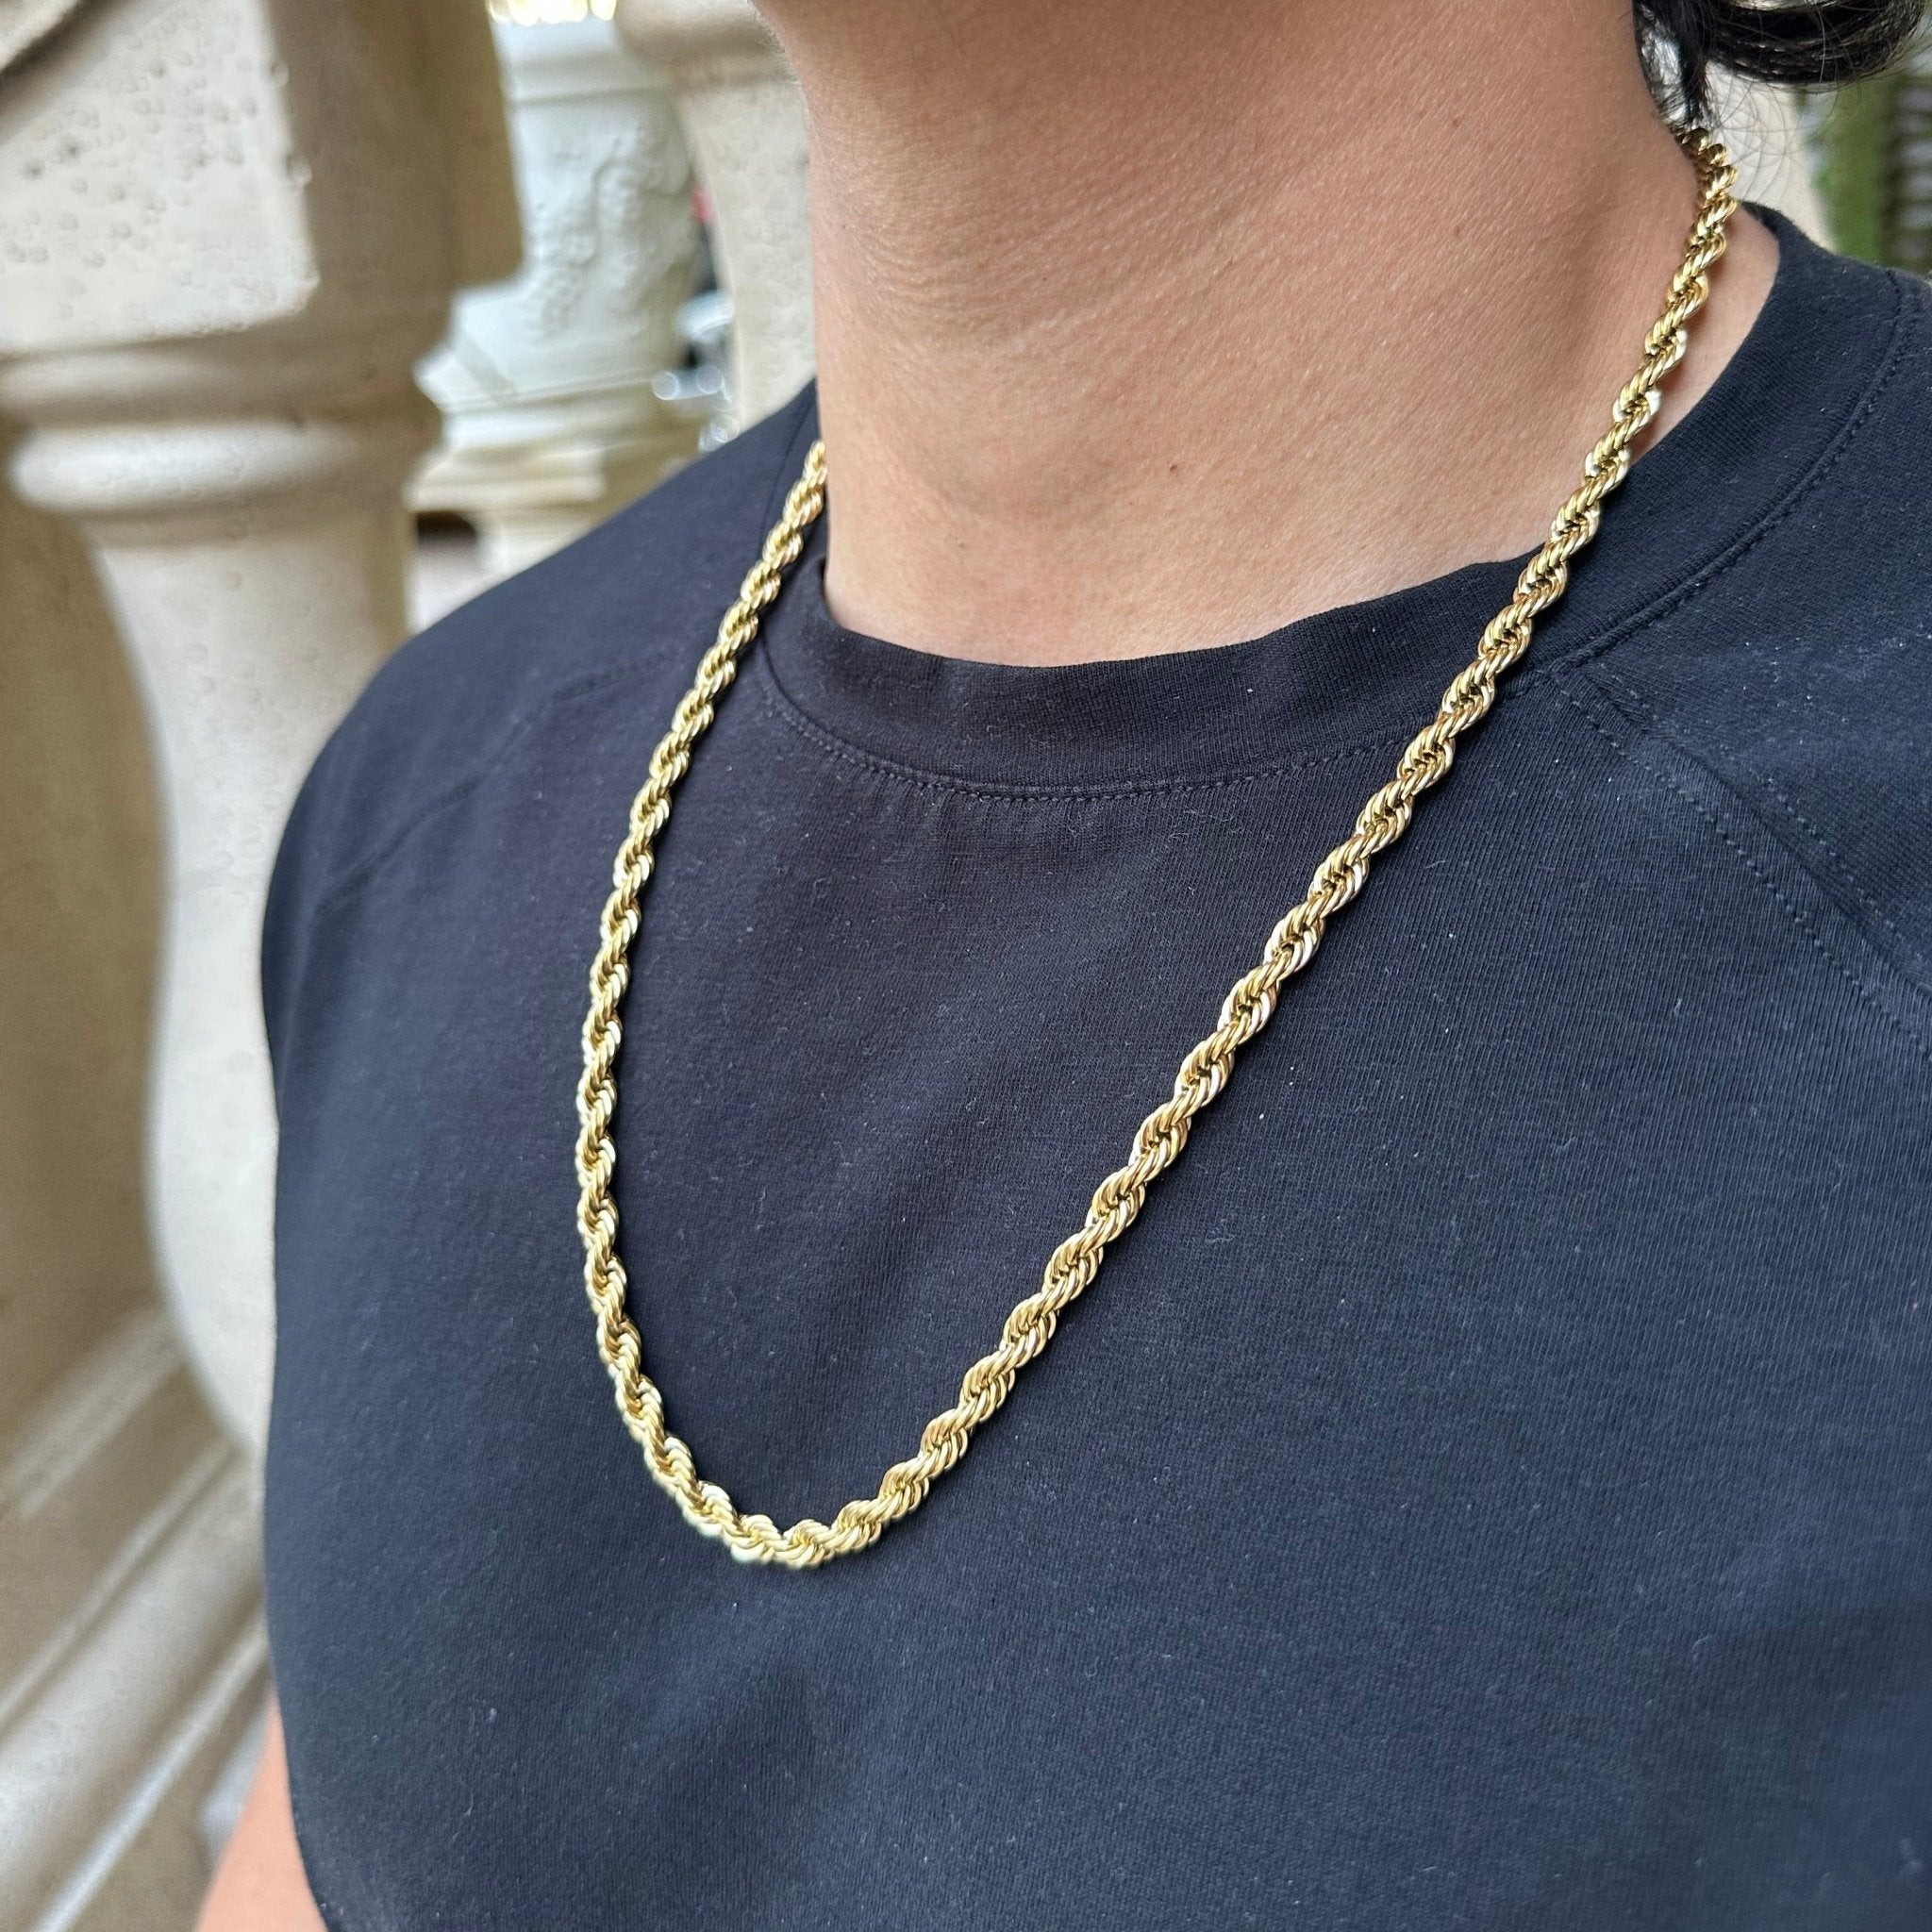 14kt Yellow Gold Men's Twisted Rope Chain Necklace and Bracelet Set -  Walmart.com